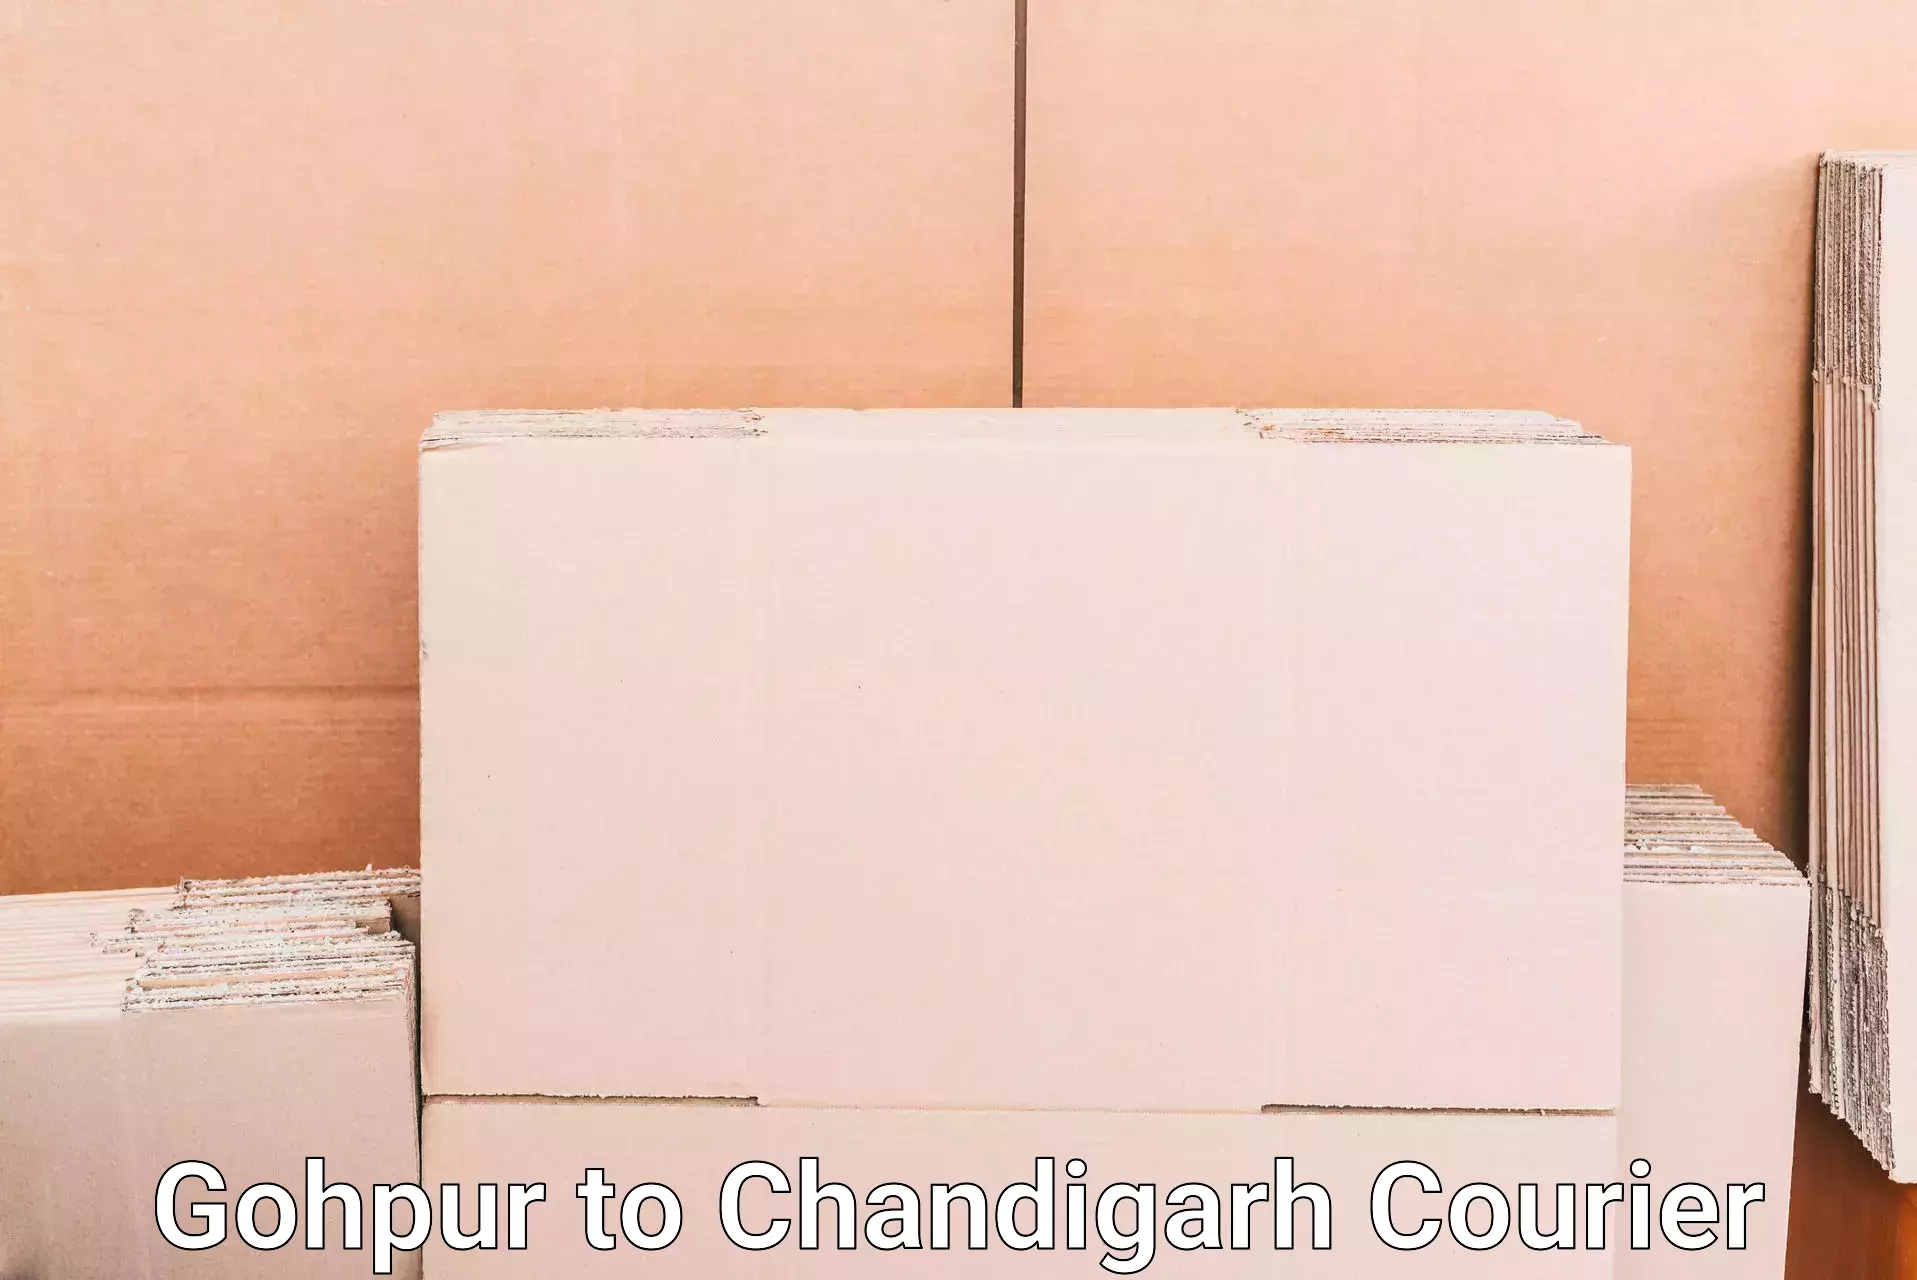 Luggage shipment processing in Gohpur to Chandigarh